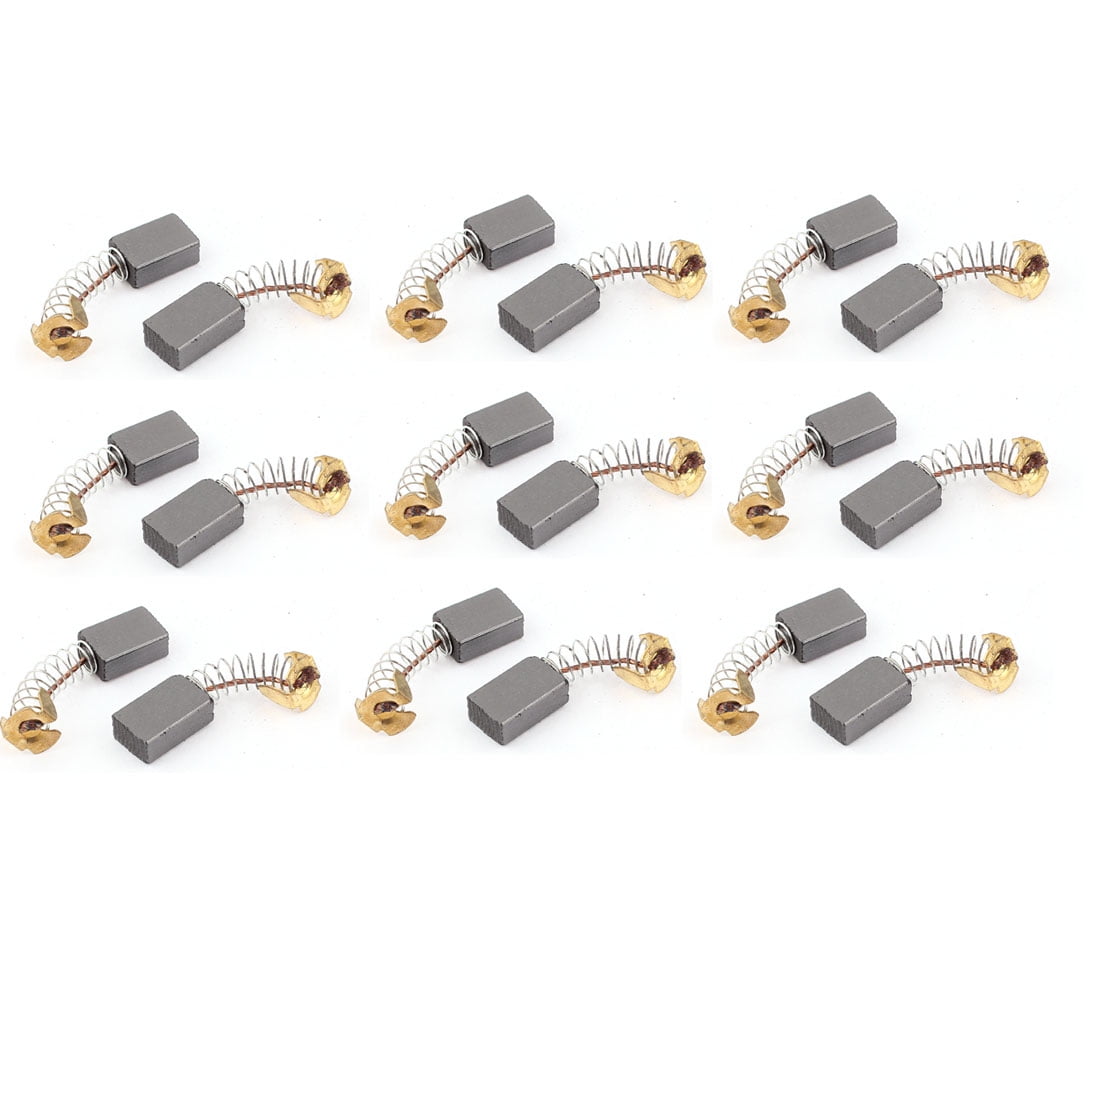 20Pcs 15x10x6mm Electric Motor Carbon Brushes For Angle Grinder Handdrill 